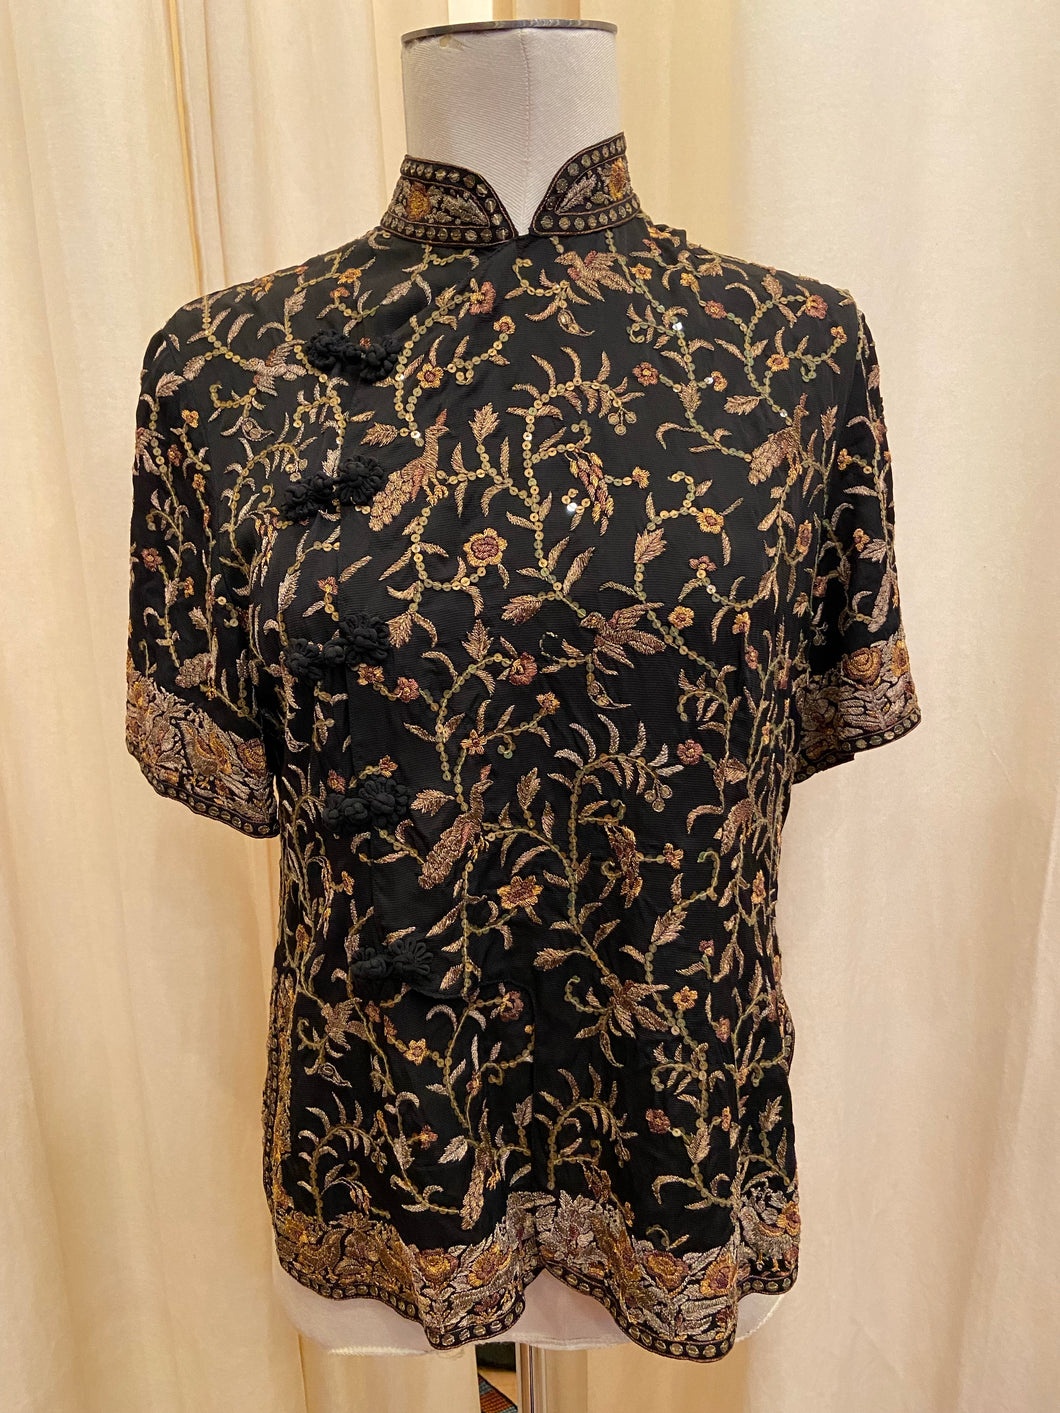 Vintage Bina’s floral embroidered Asian-style black top